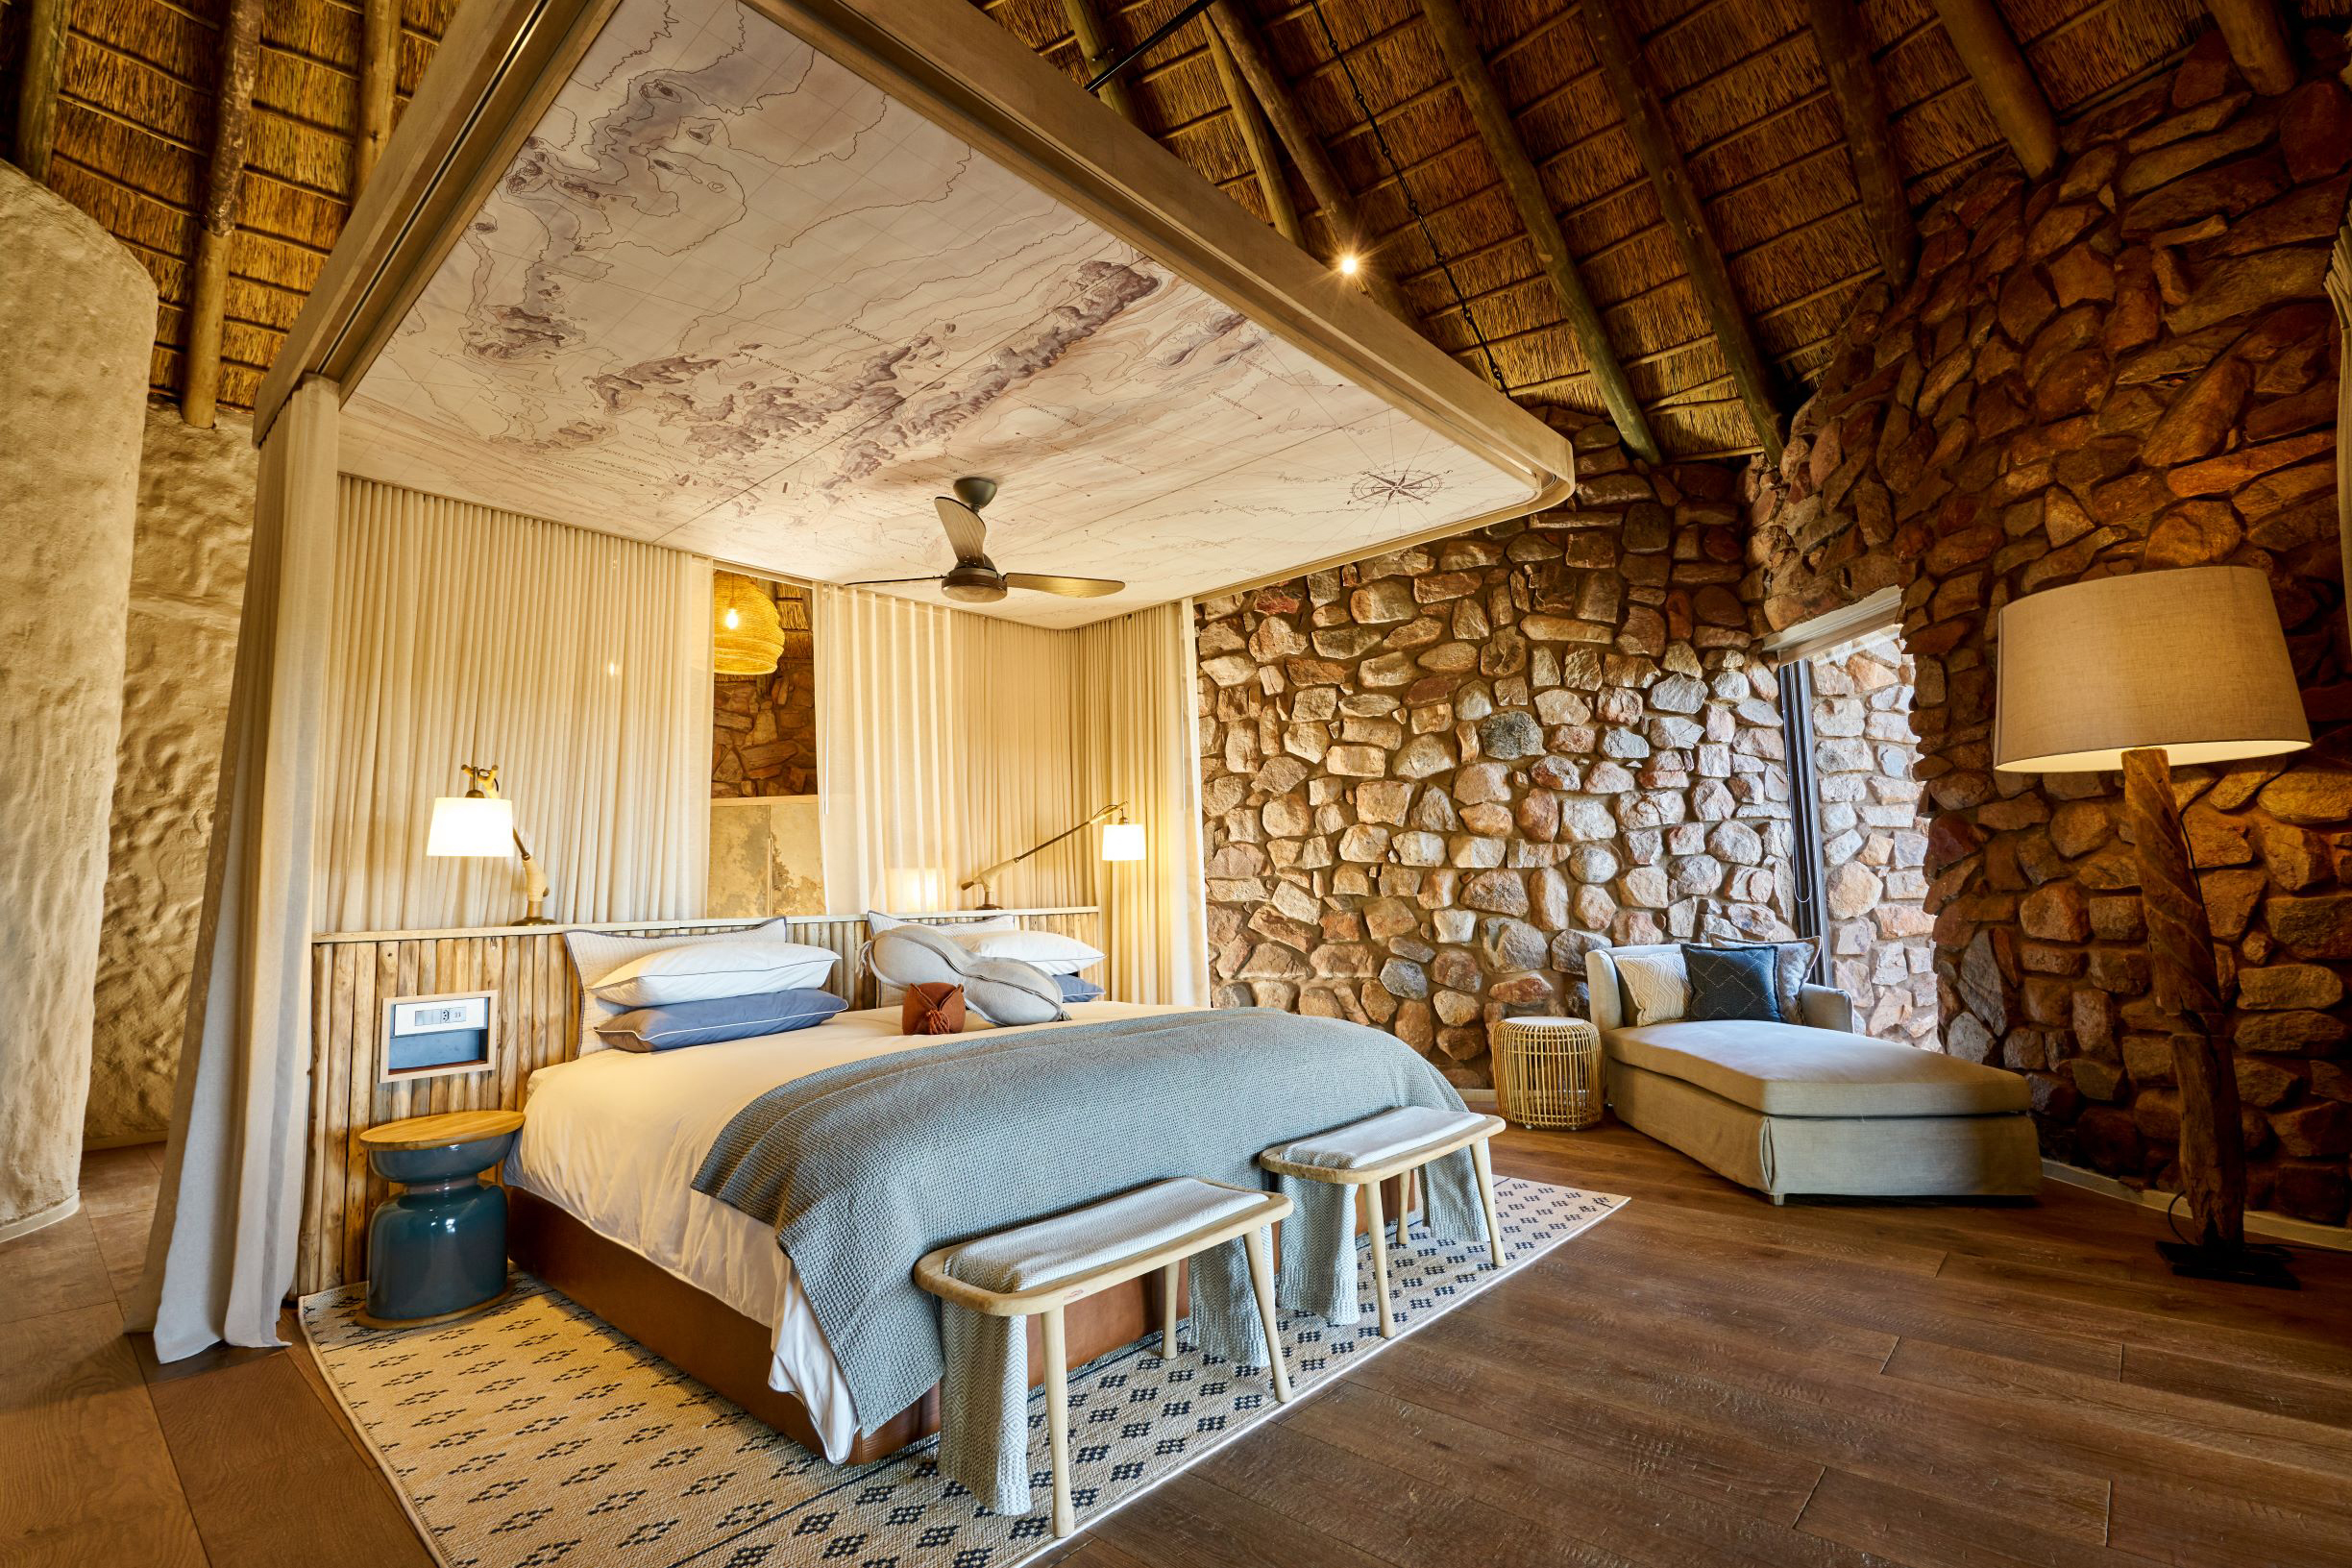 The gorgeous bedrooms at Tswalu The Motse.